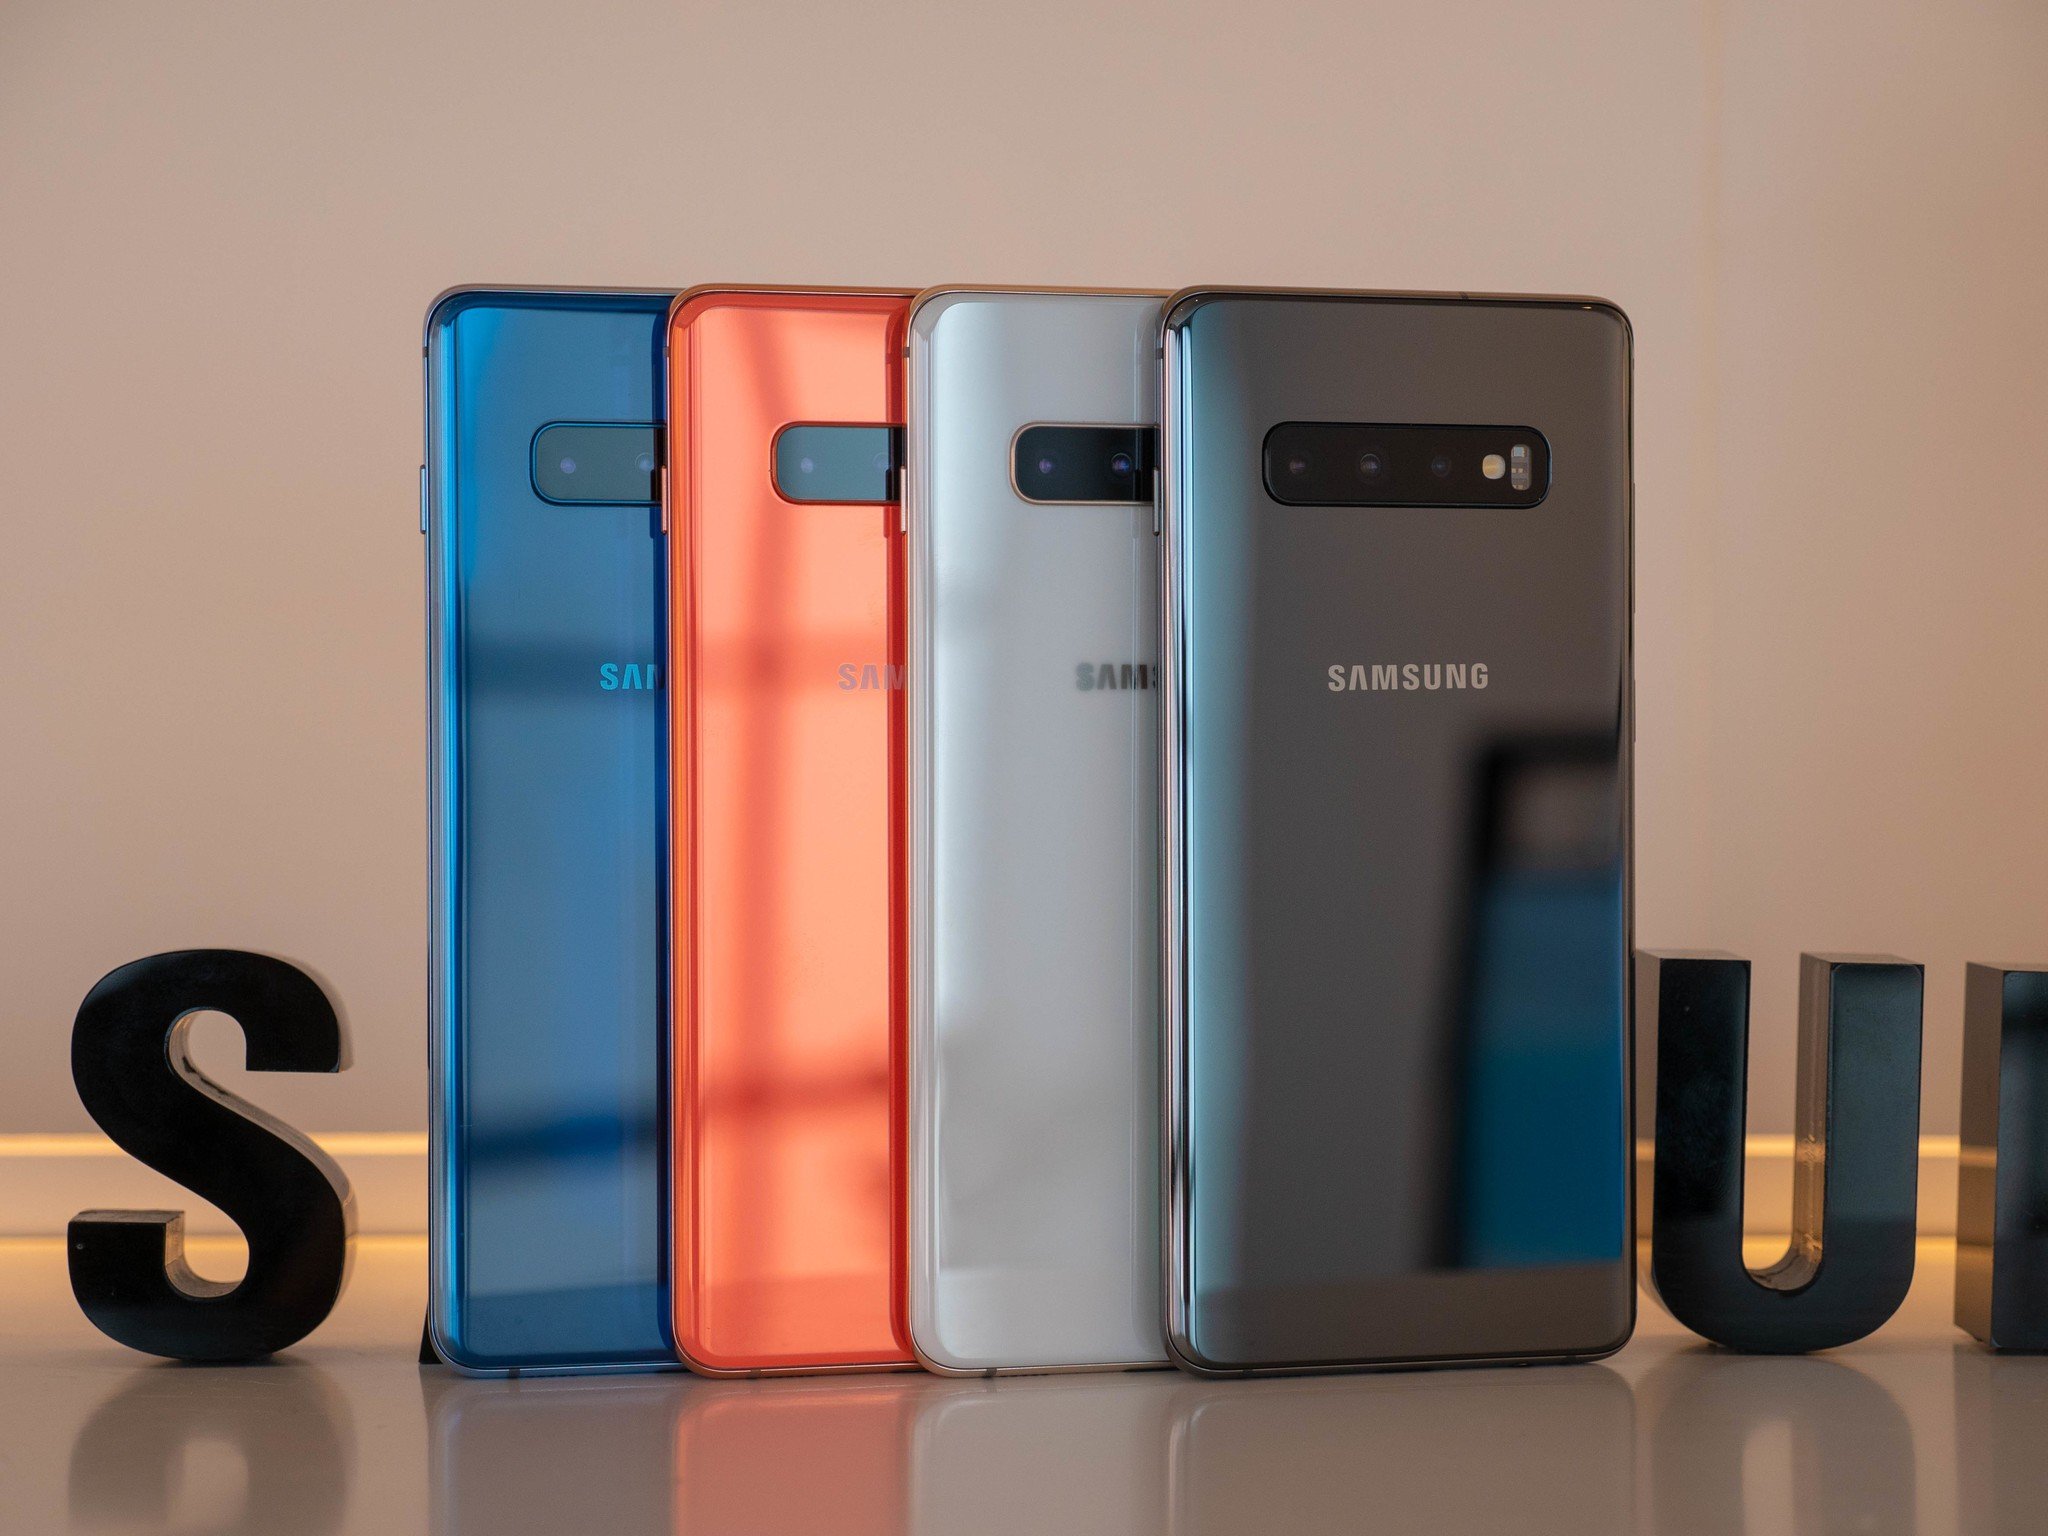 Samsung Galaxy S10e, S10, and S10+ launch in India, prices 